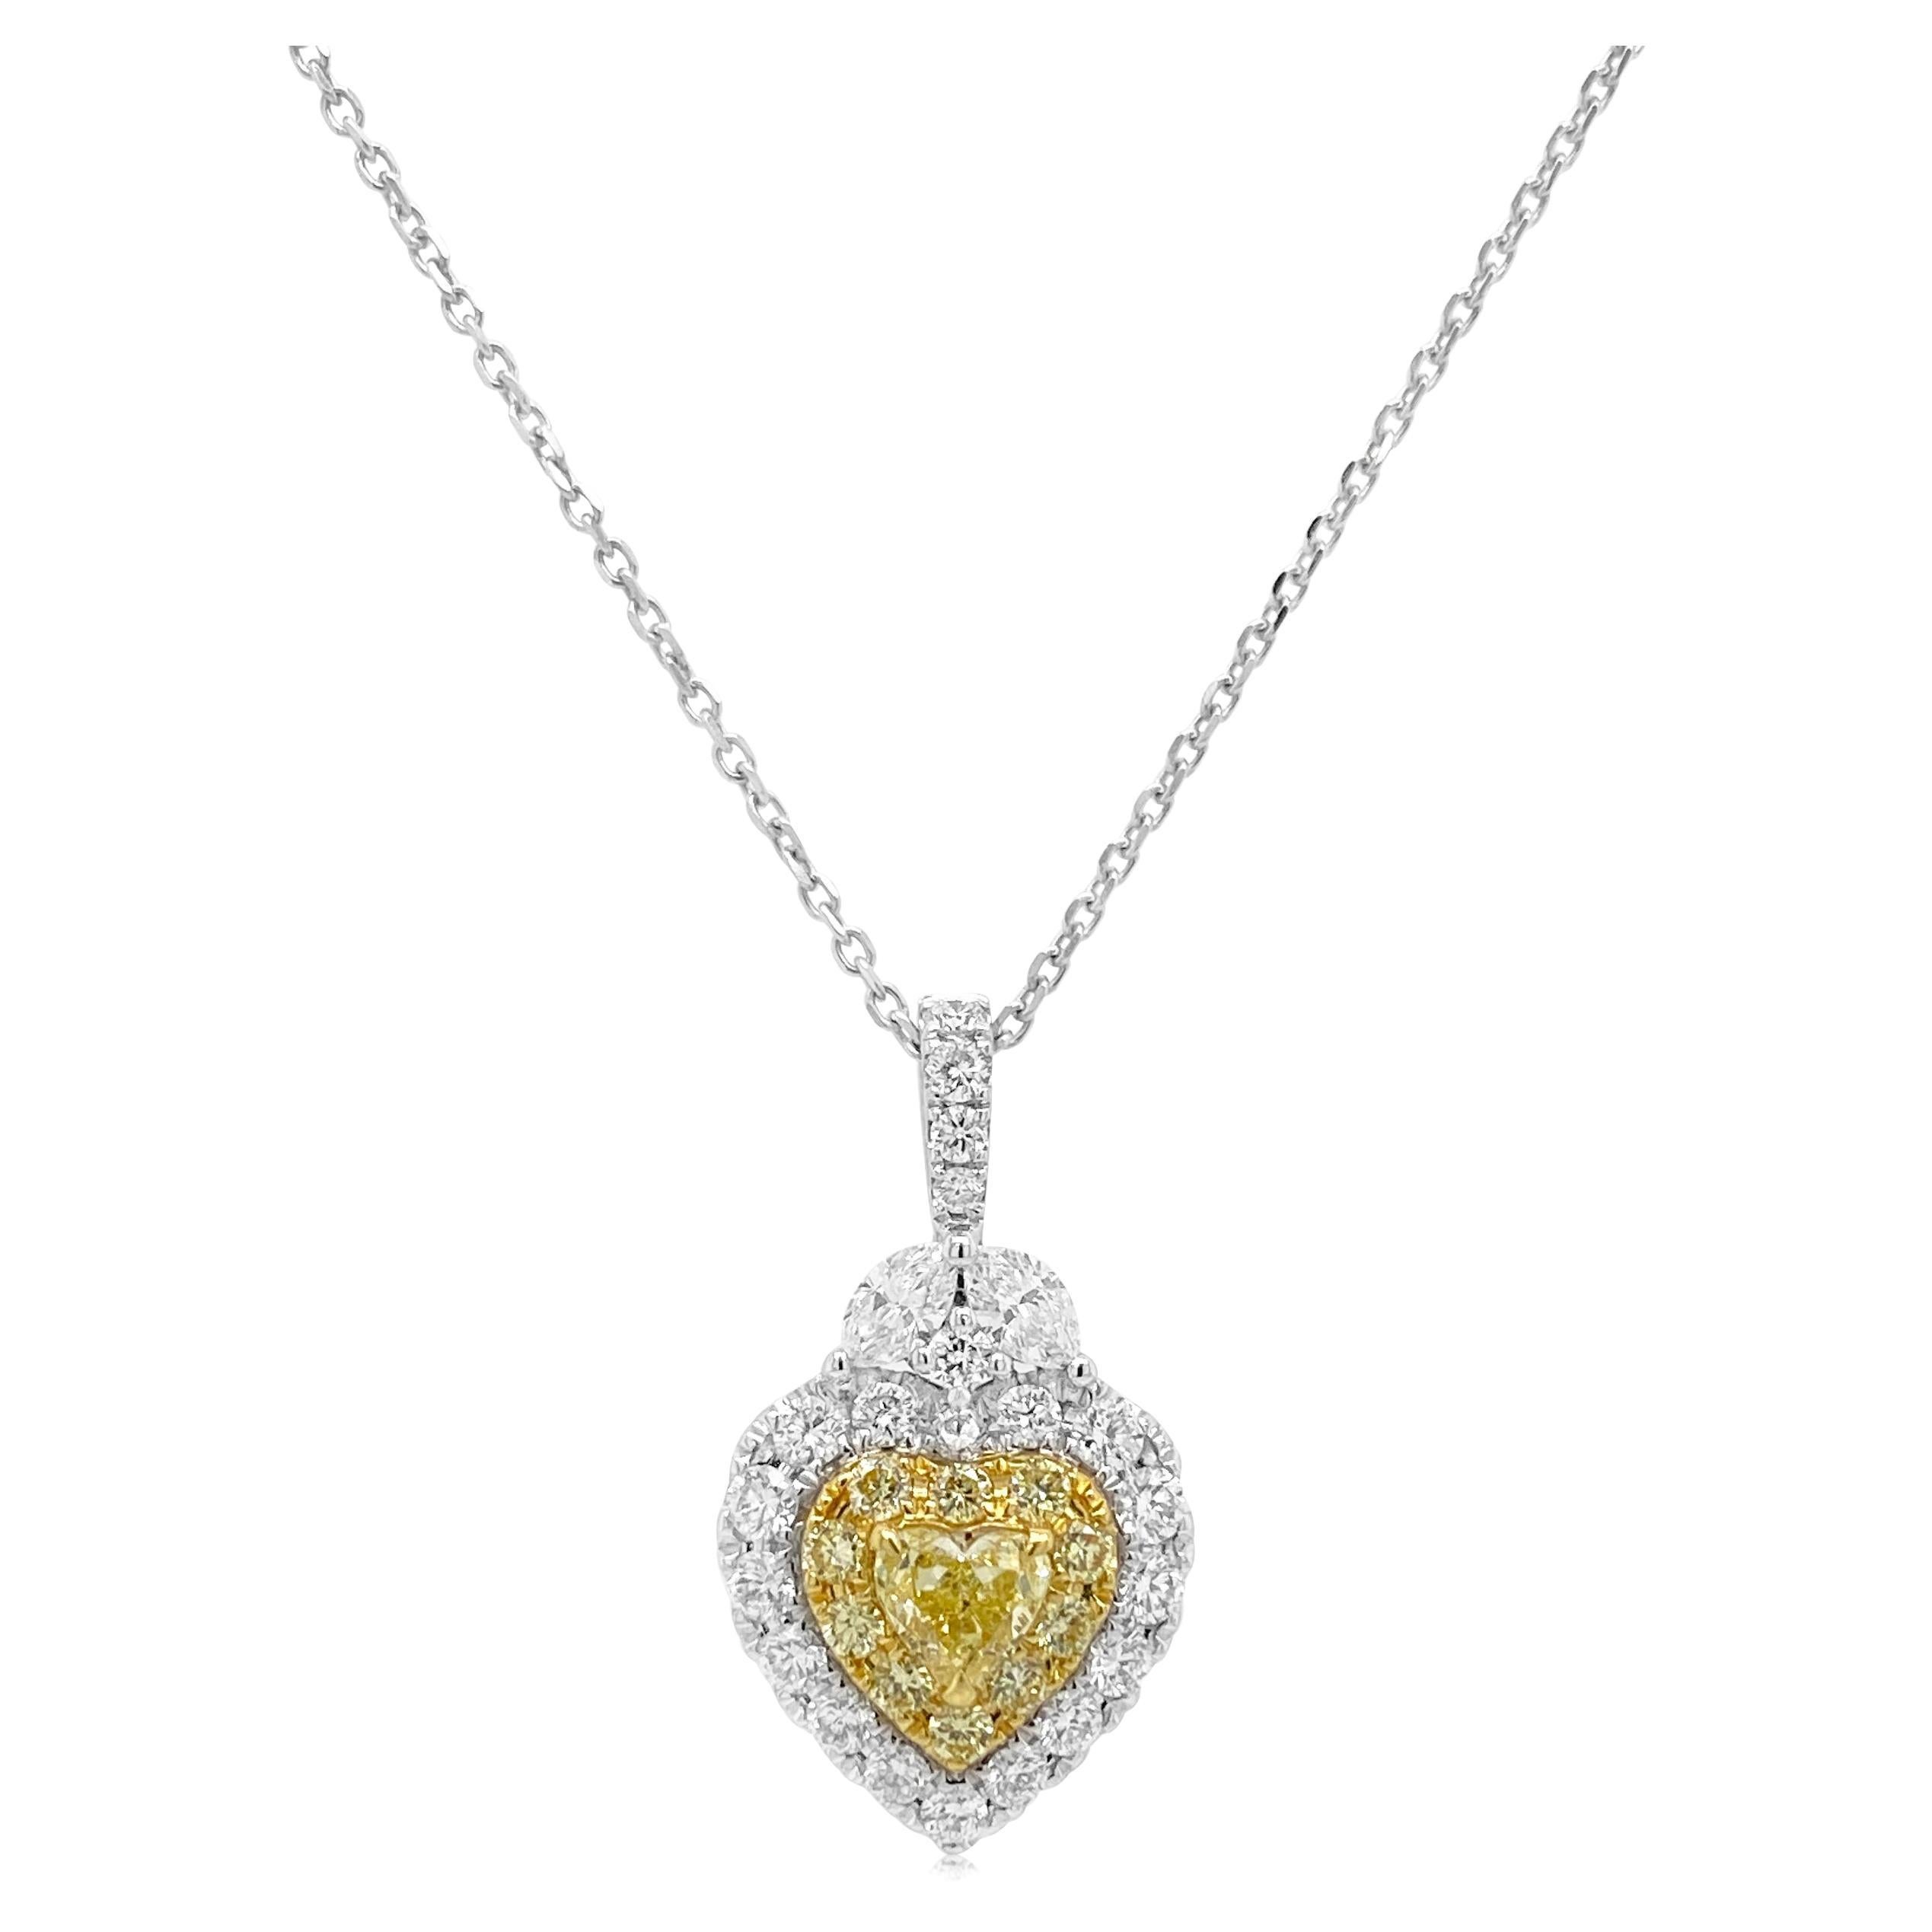 Certified Yellow and White diamond Heart shape Pendant with Platinum Chain